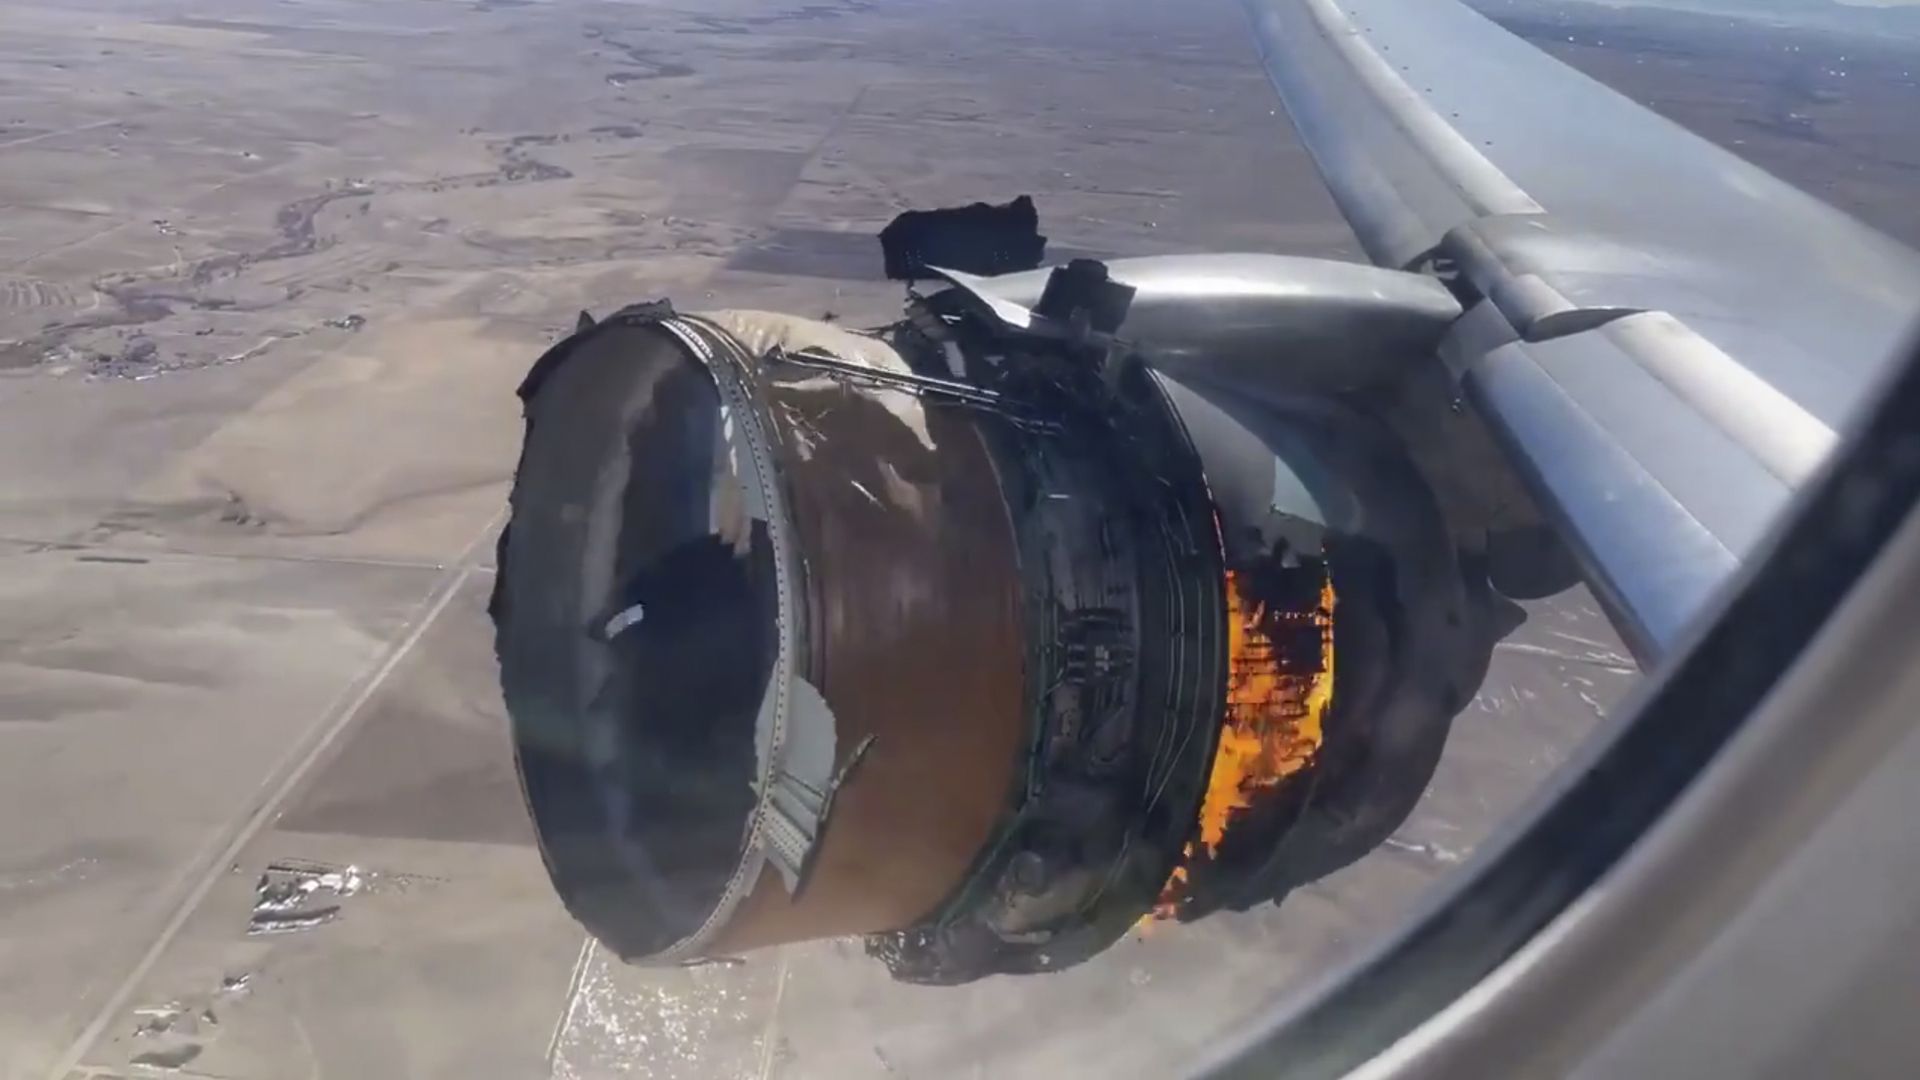 A Boeing 777 with an engine on fire